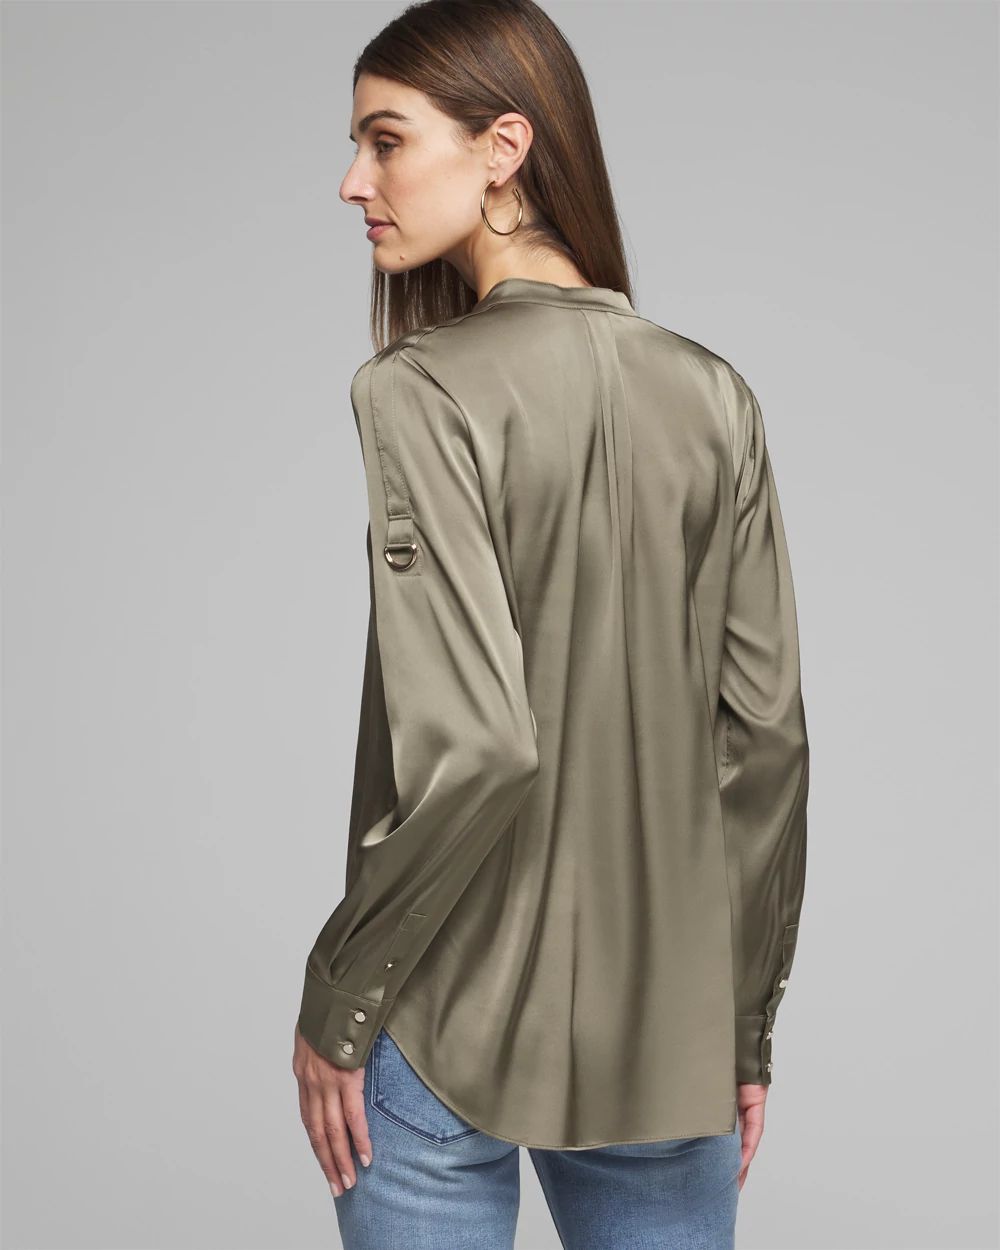 Outlet WHBM Long Sleeve Utility Shirt click to view larger image.